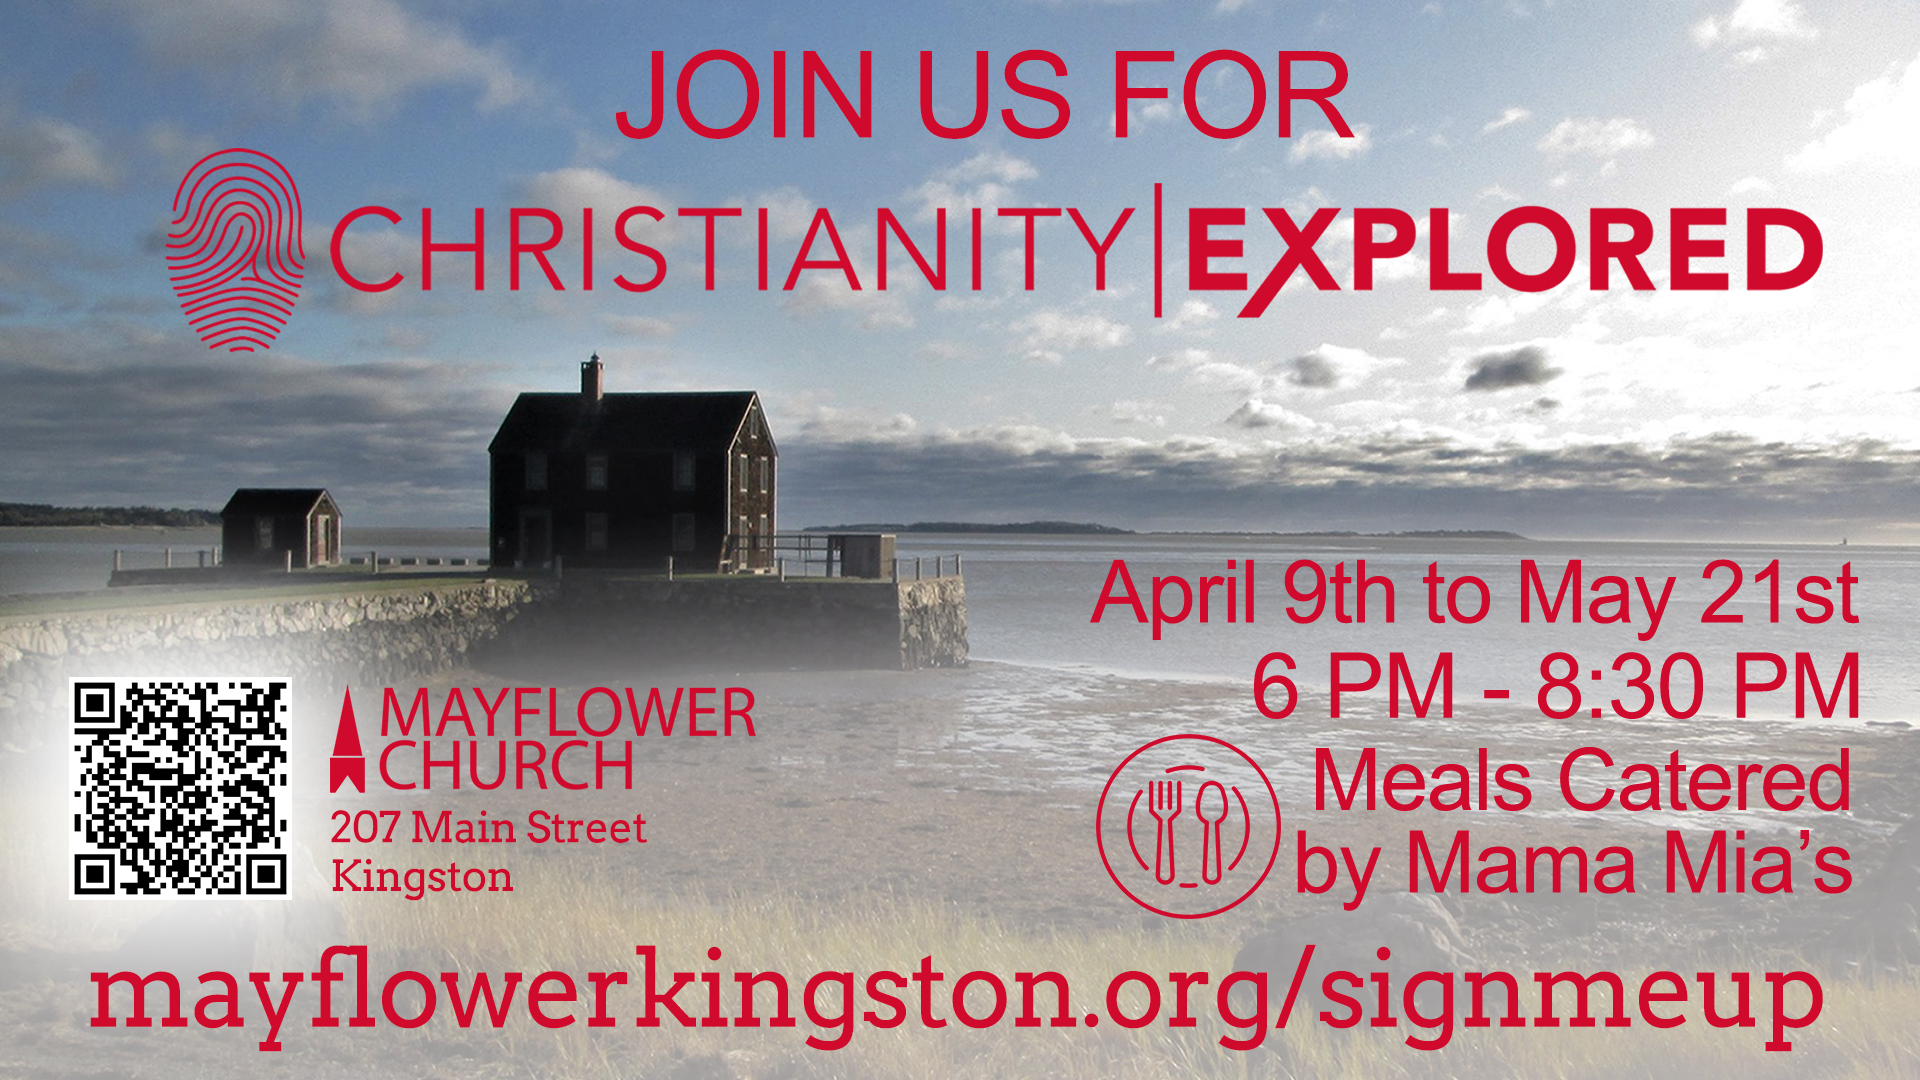 Join us for Christianity Explored!